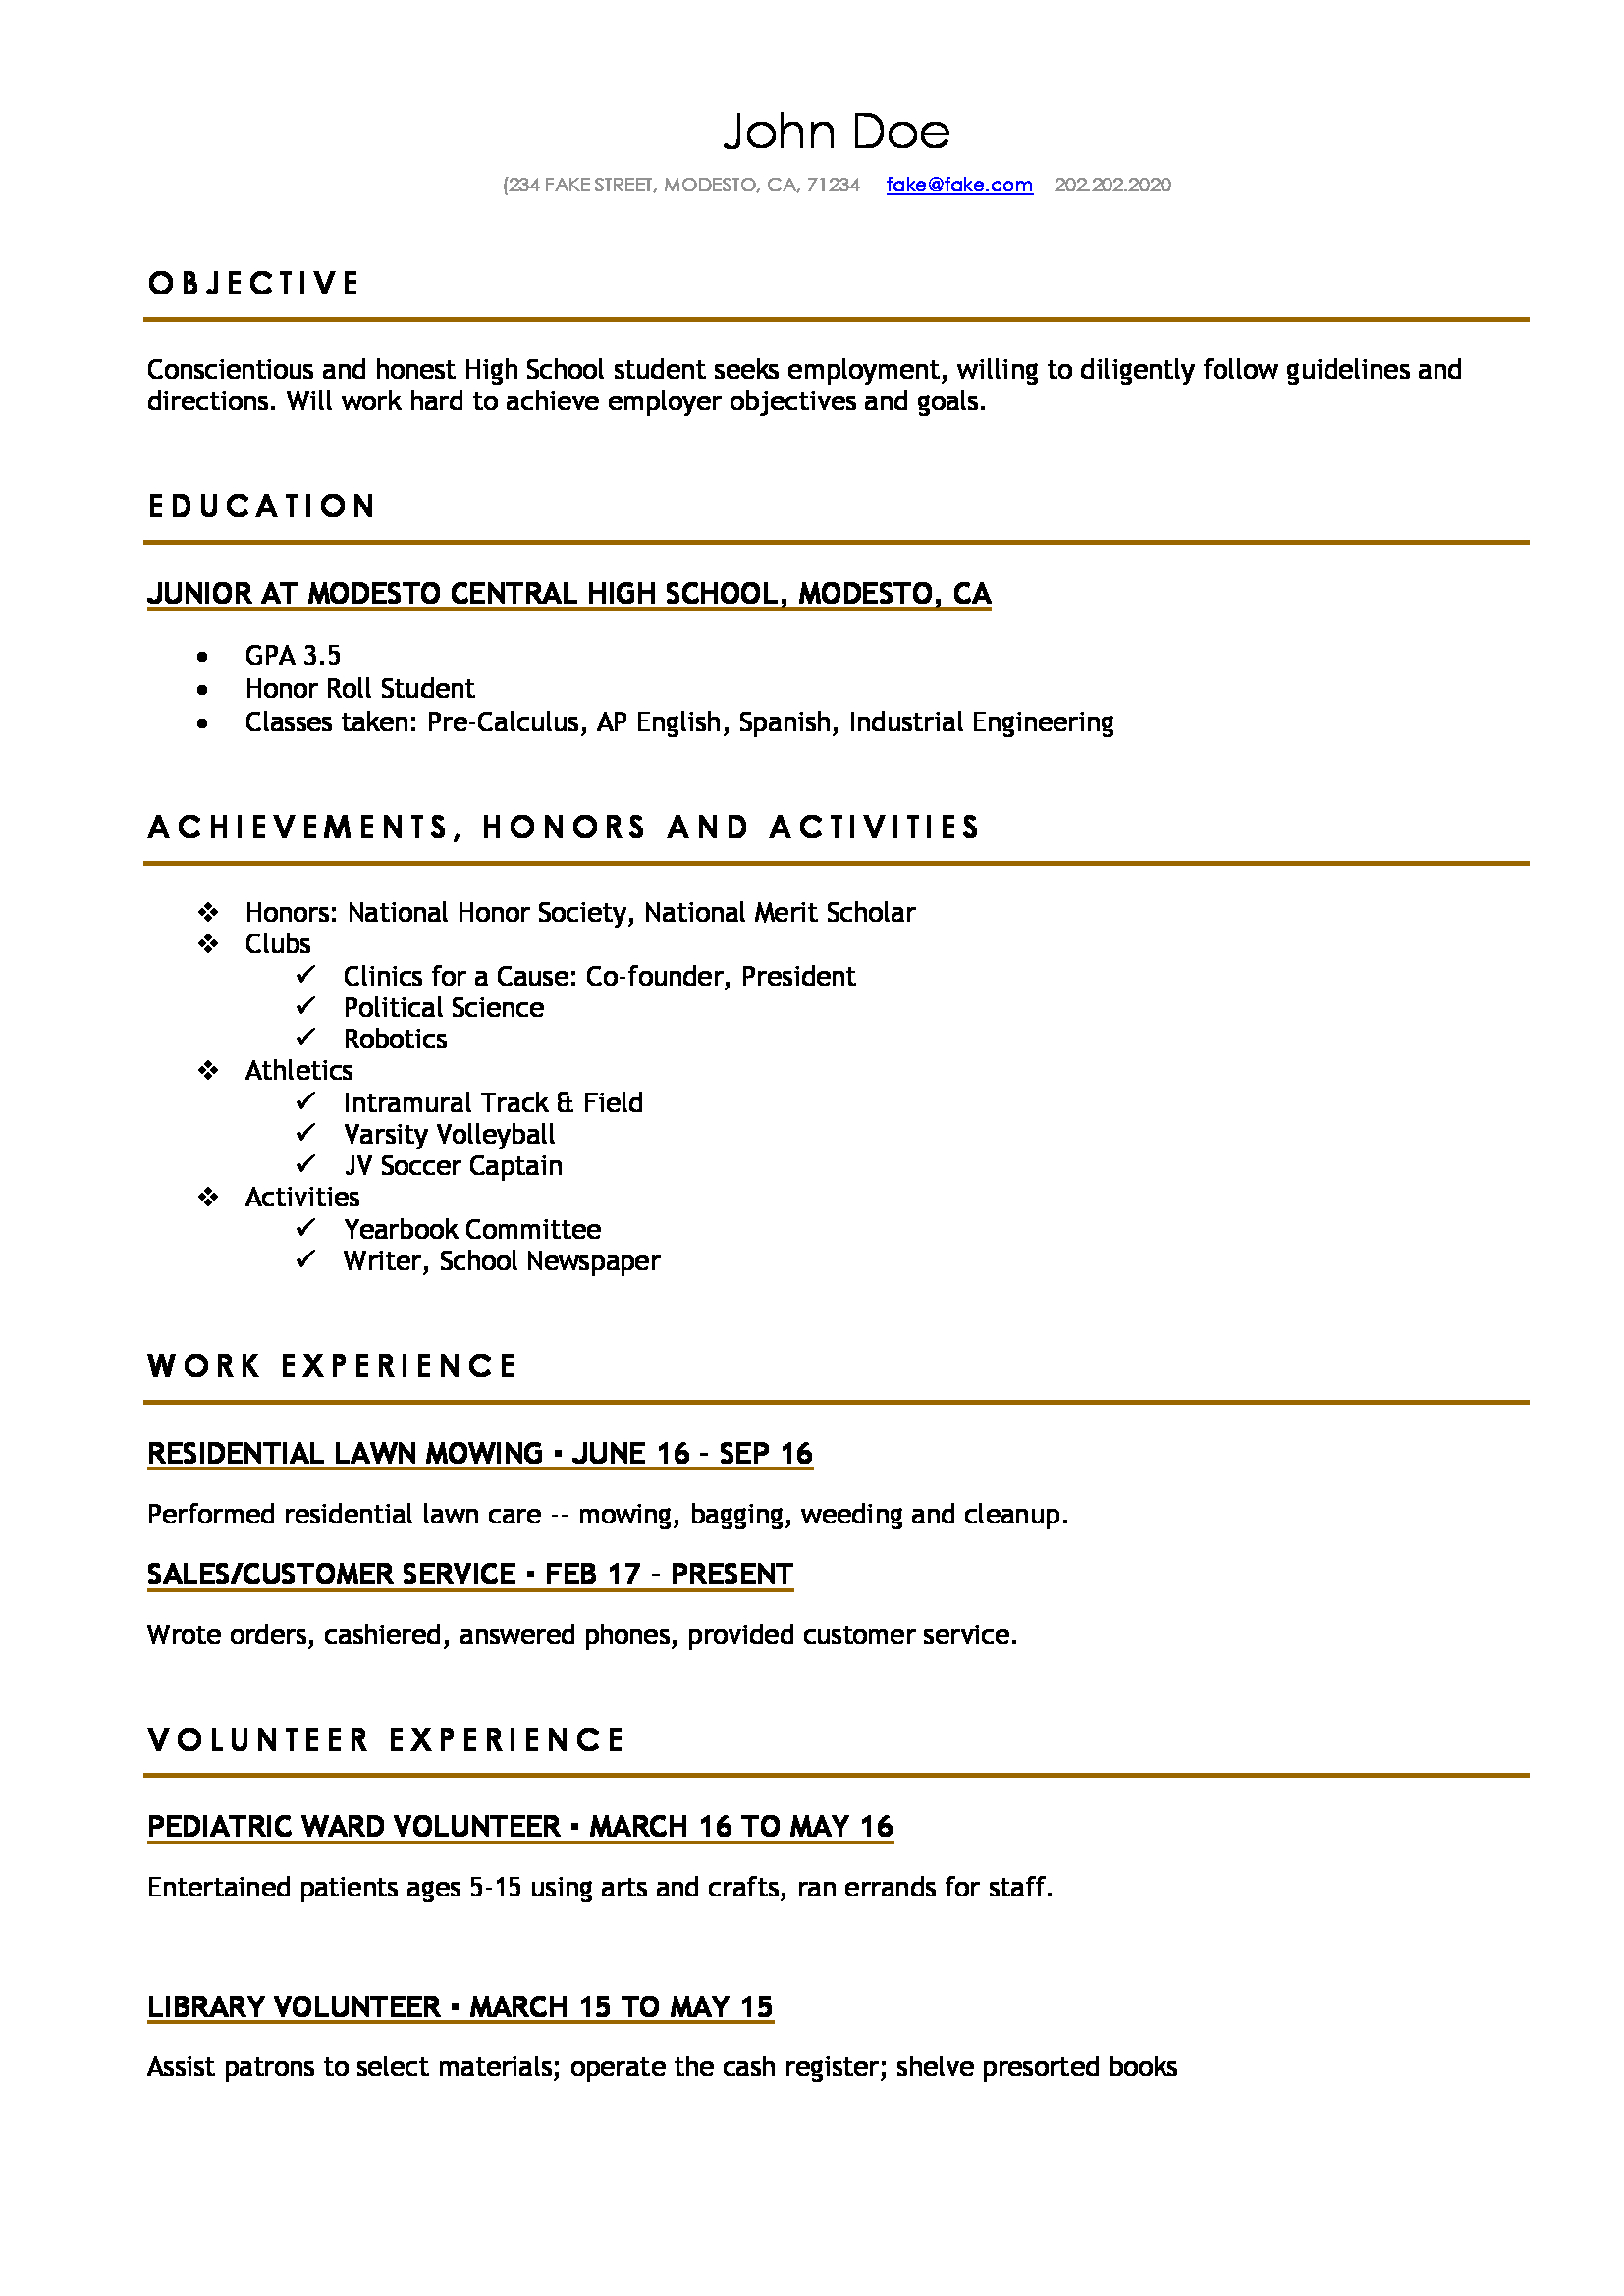 Resume For High School Student 72a45a1e Fba6 4eed 9dae 56718781d6b8 resume for high school student|wikiresume.com